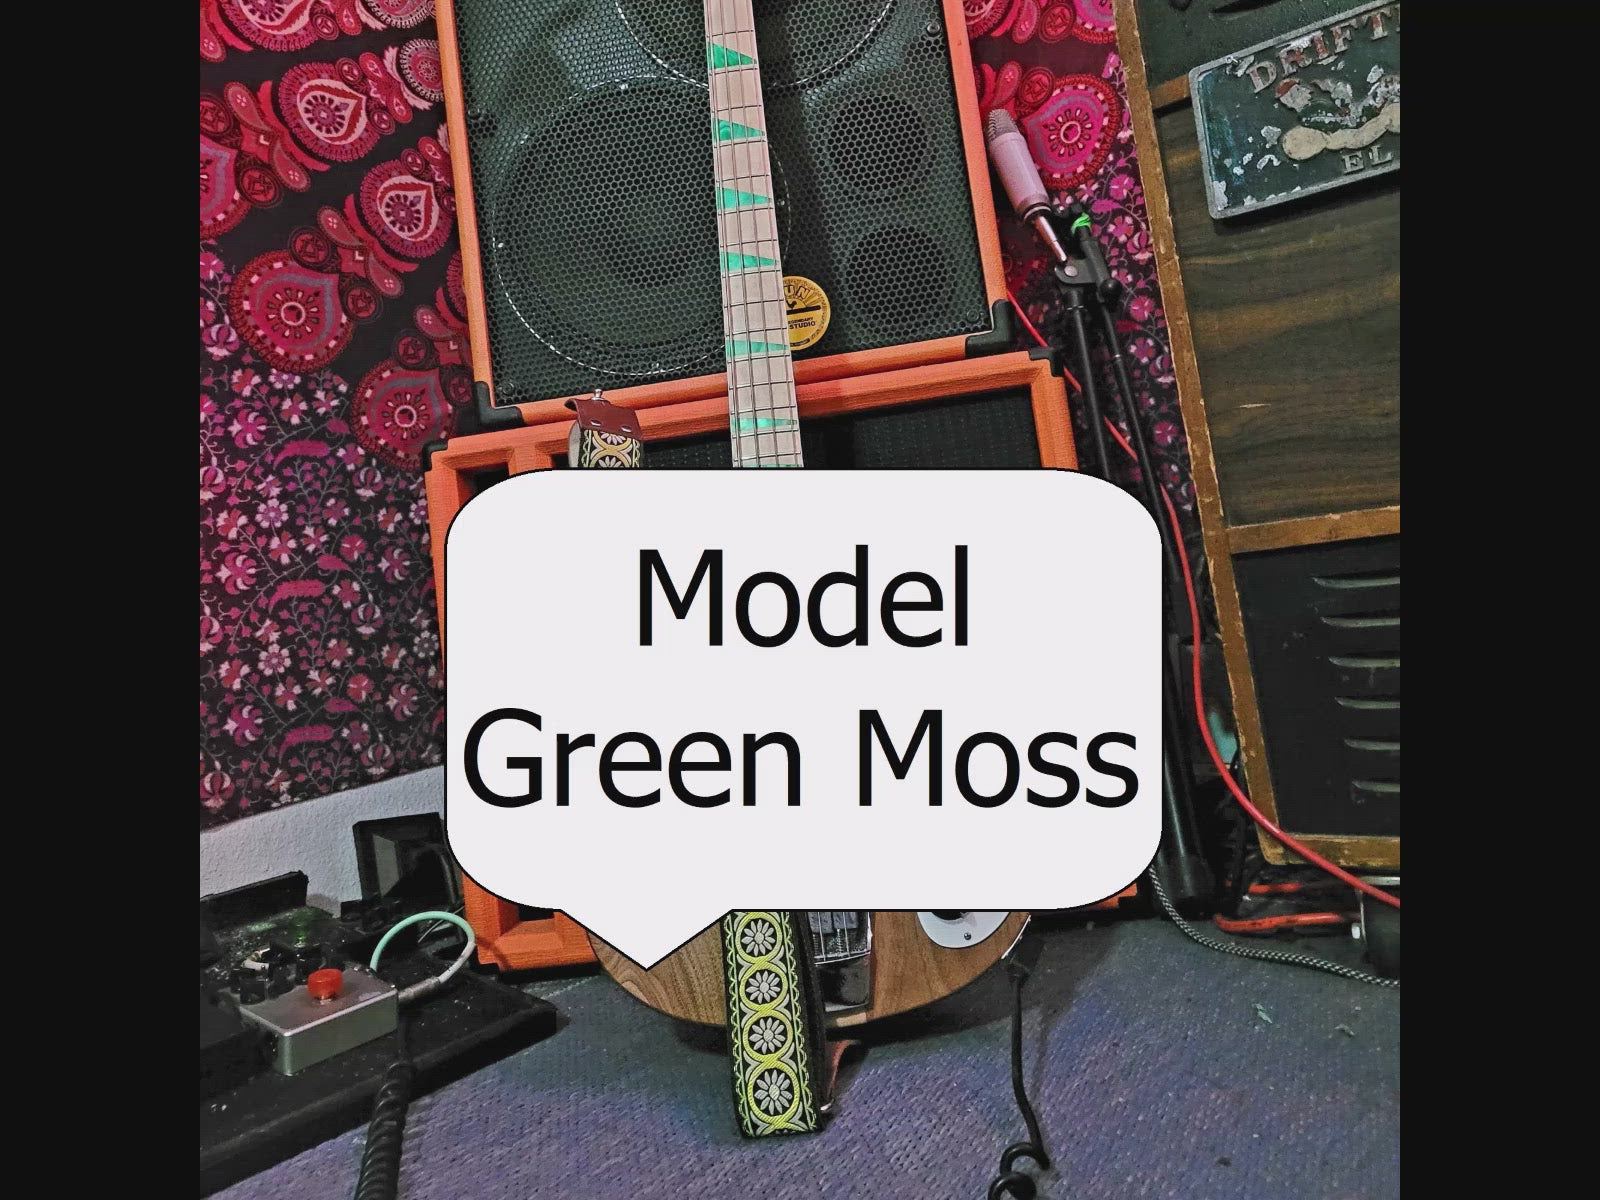 Model Green Moss, Pardo Guitar Straps, hippie strap for guitar and bass replica from the 60s, frontside green fabric with flowers